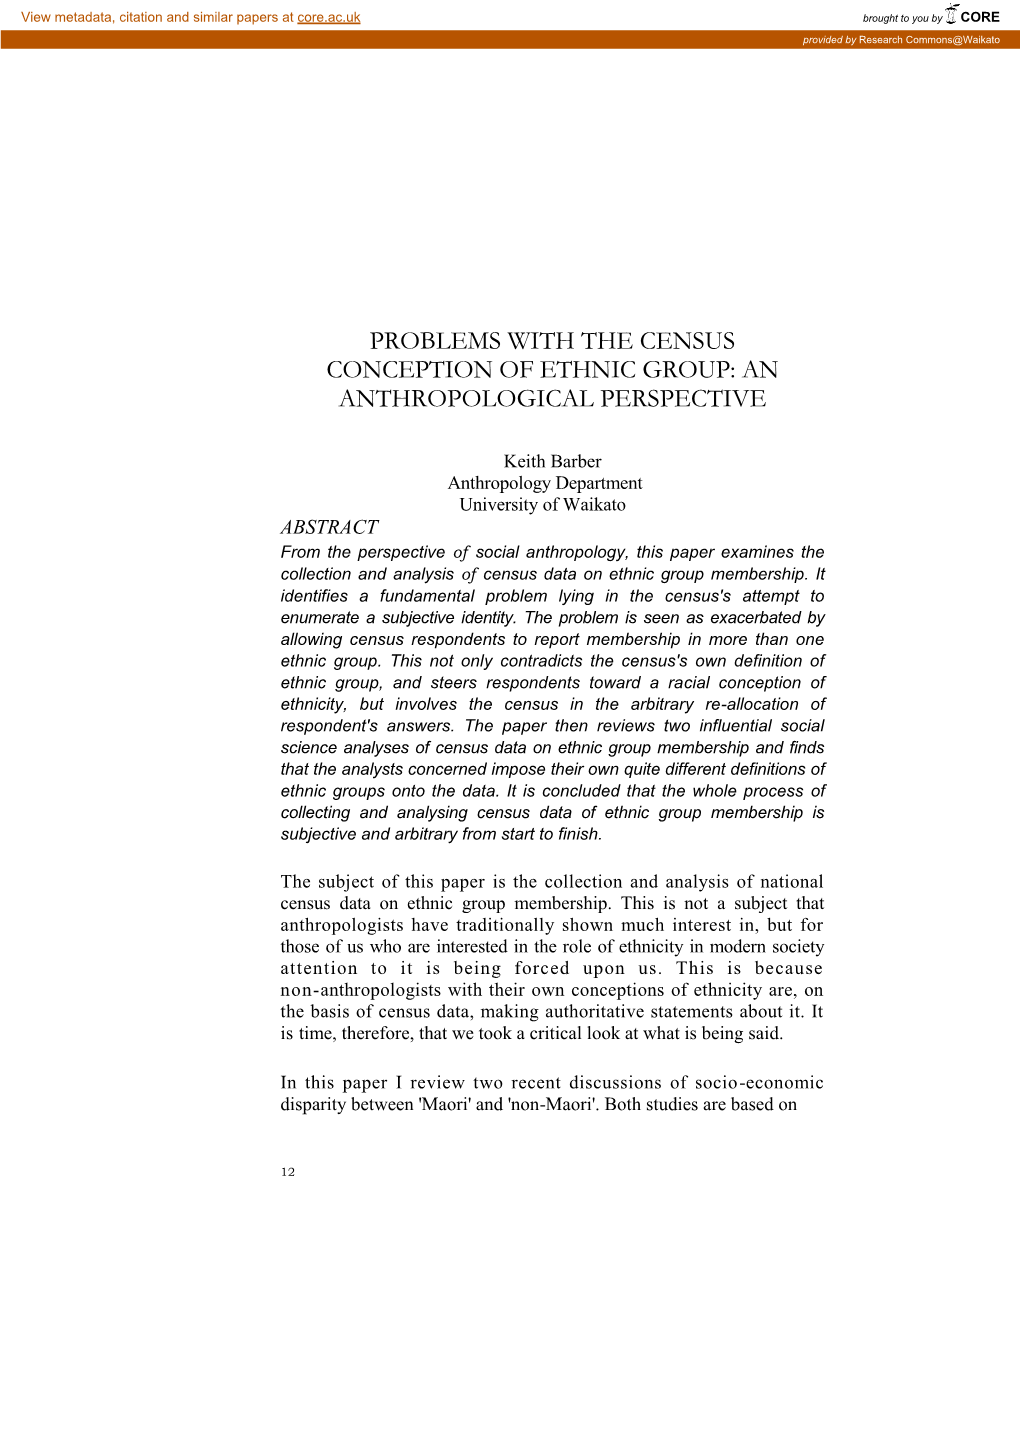 Problems with the Census Conception of Ethnic Group: an Anthropological Perspective